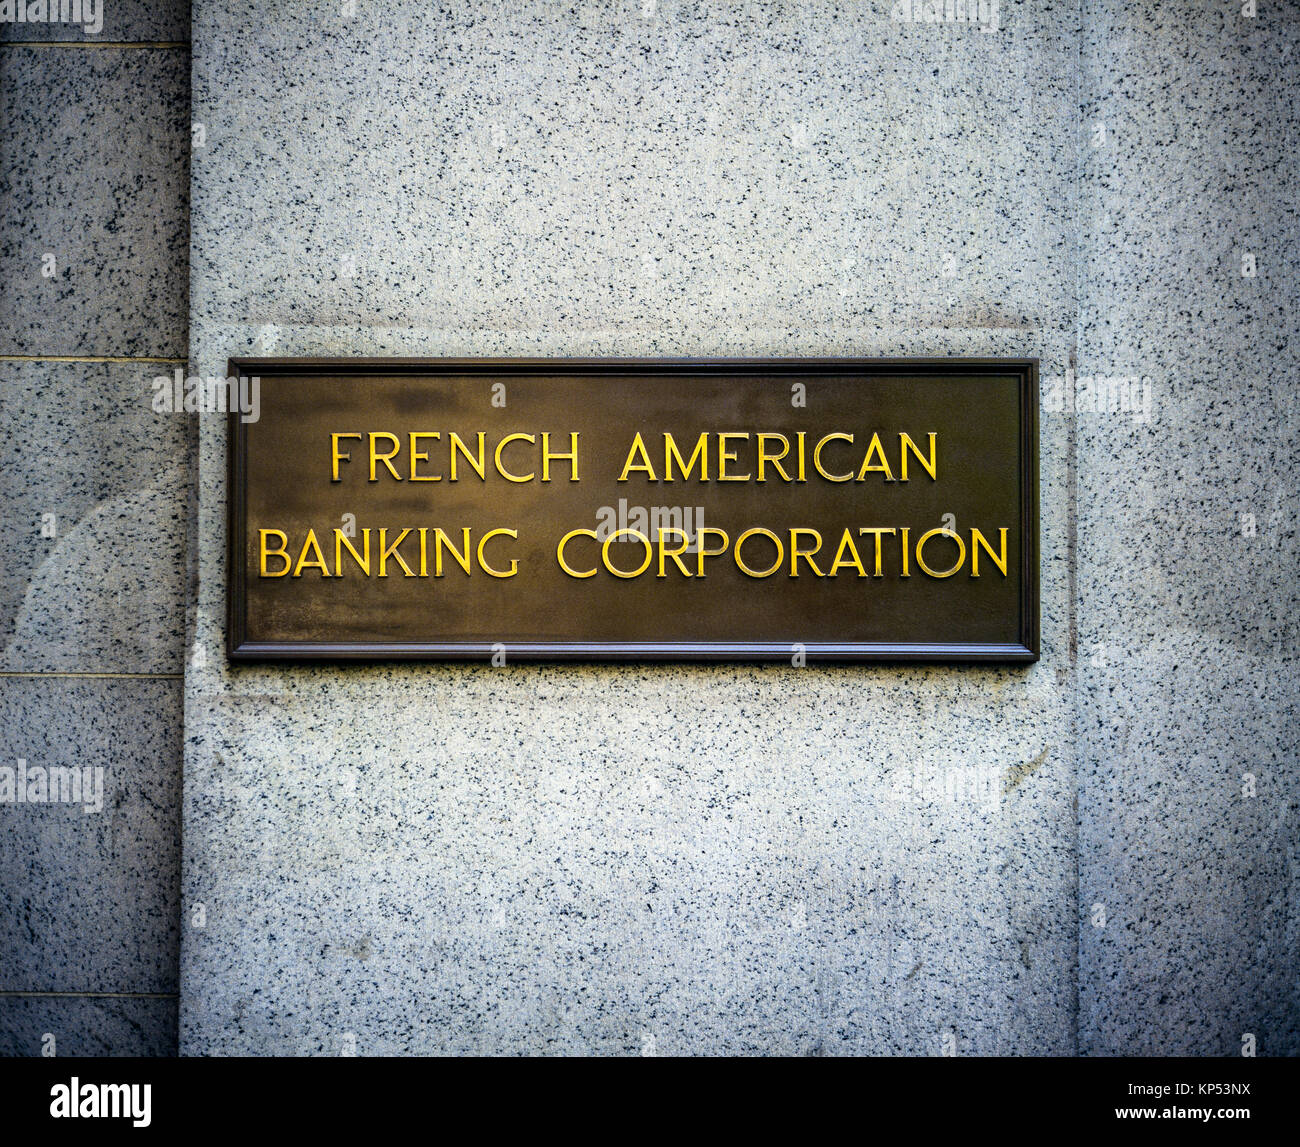 May 1982,New York,French American Banking Corporation sign,FABC,financial district,lower Manhattan,New york City,NY,NYC,USA, Stock Photo